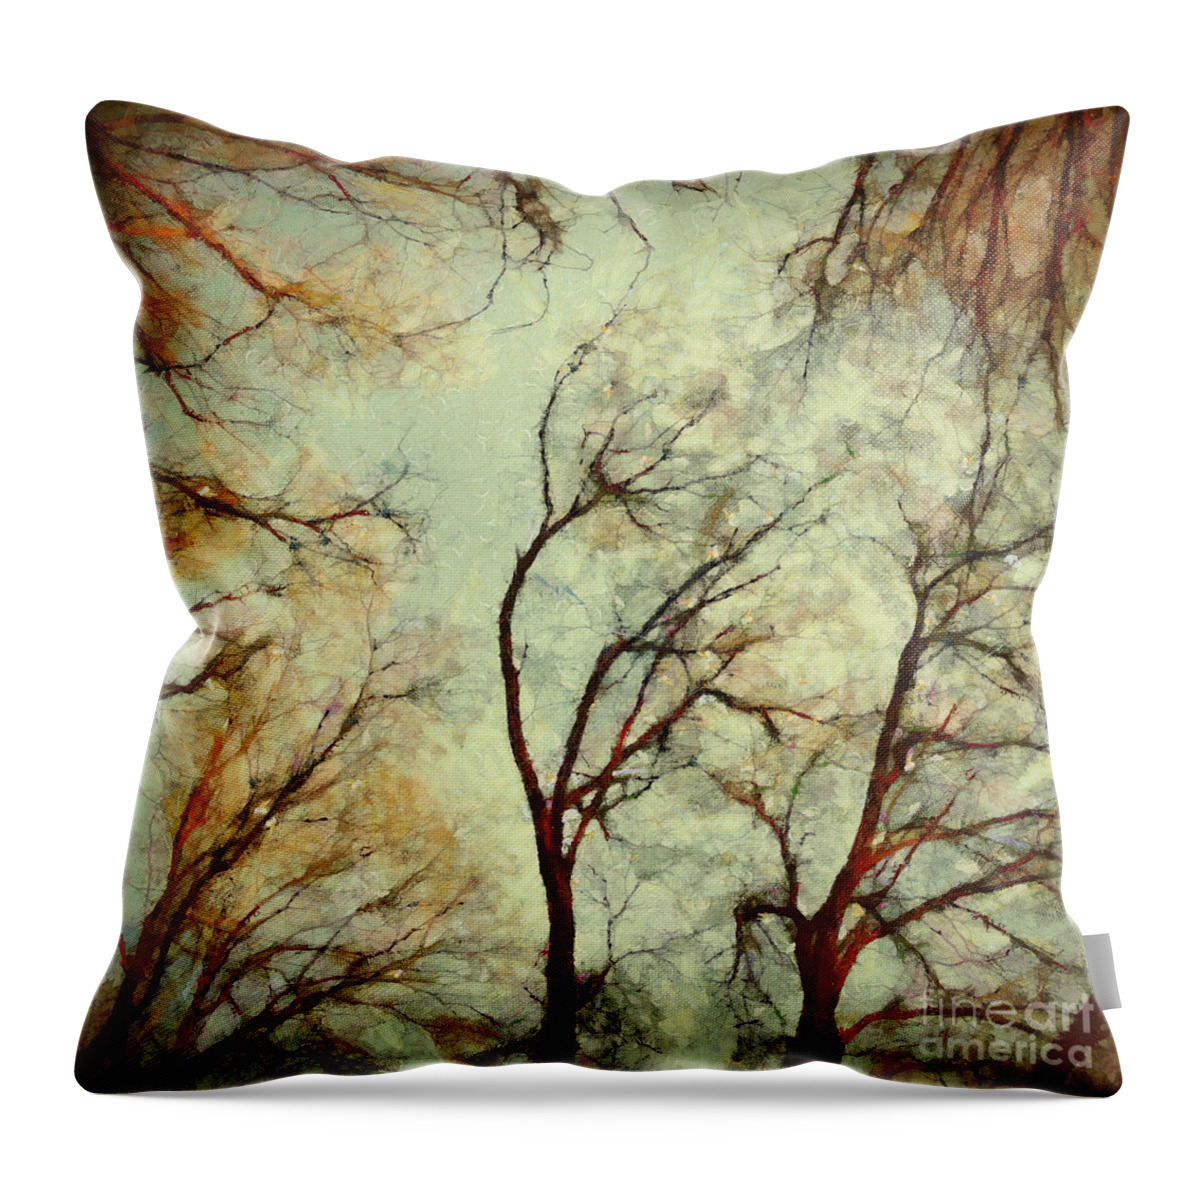 Landscape Throw Pillow featuring the painting The Forest by Dimitar Hristov